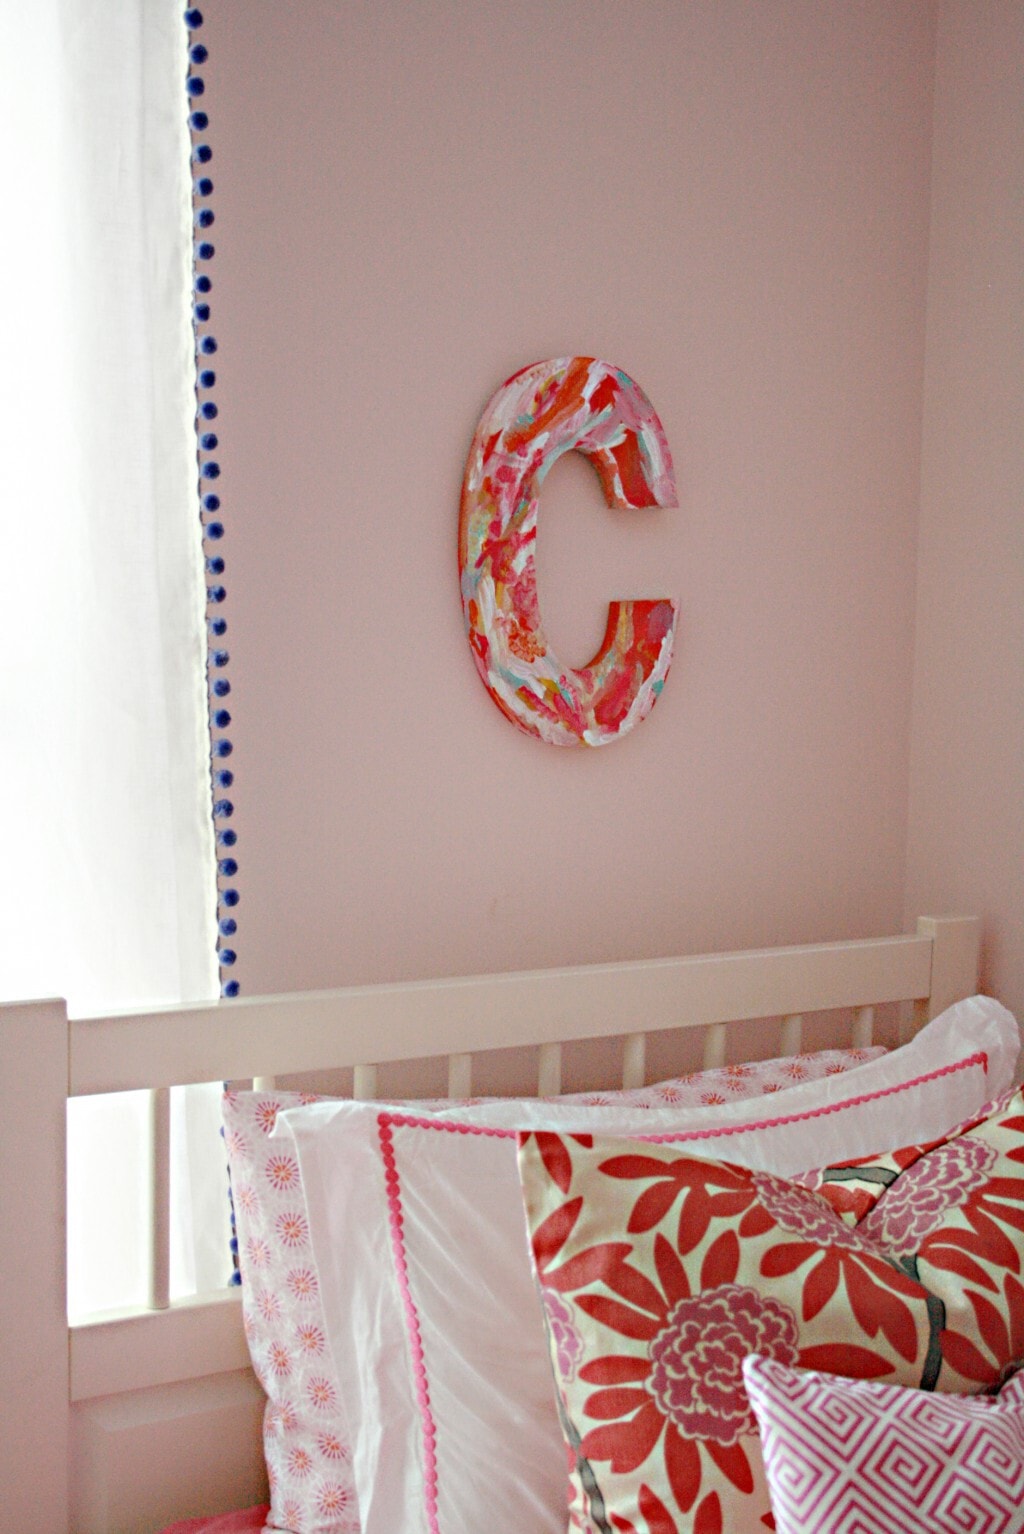 Personalized Initial Letter Art on www.orsoshesays.com. A fun project to do with (or without!) the kids. #initialart #letterart #lettering #homedecor #DIY #crafts